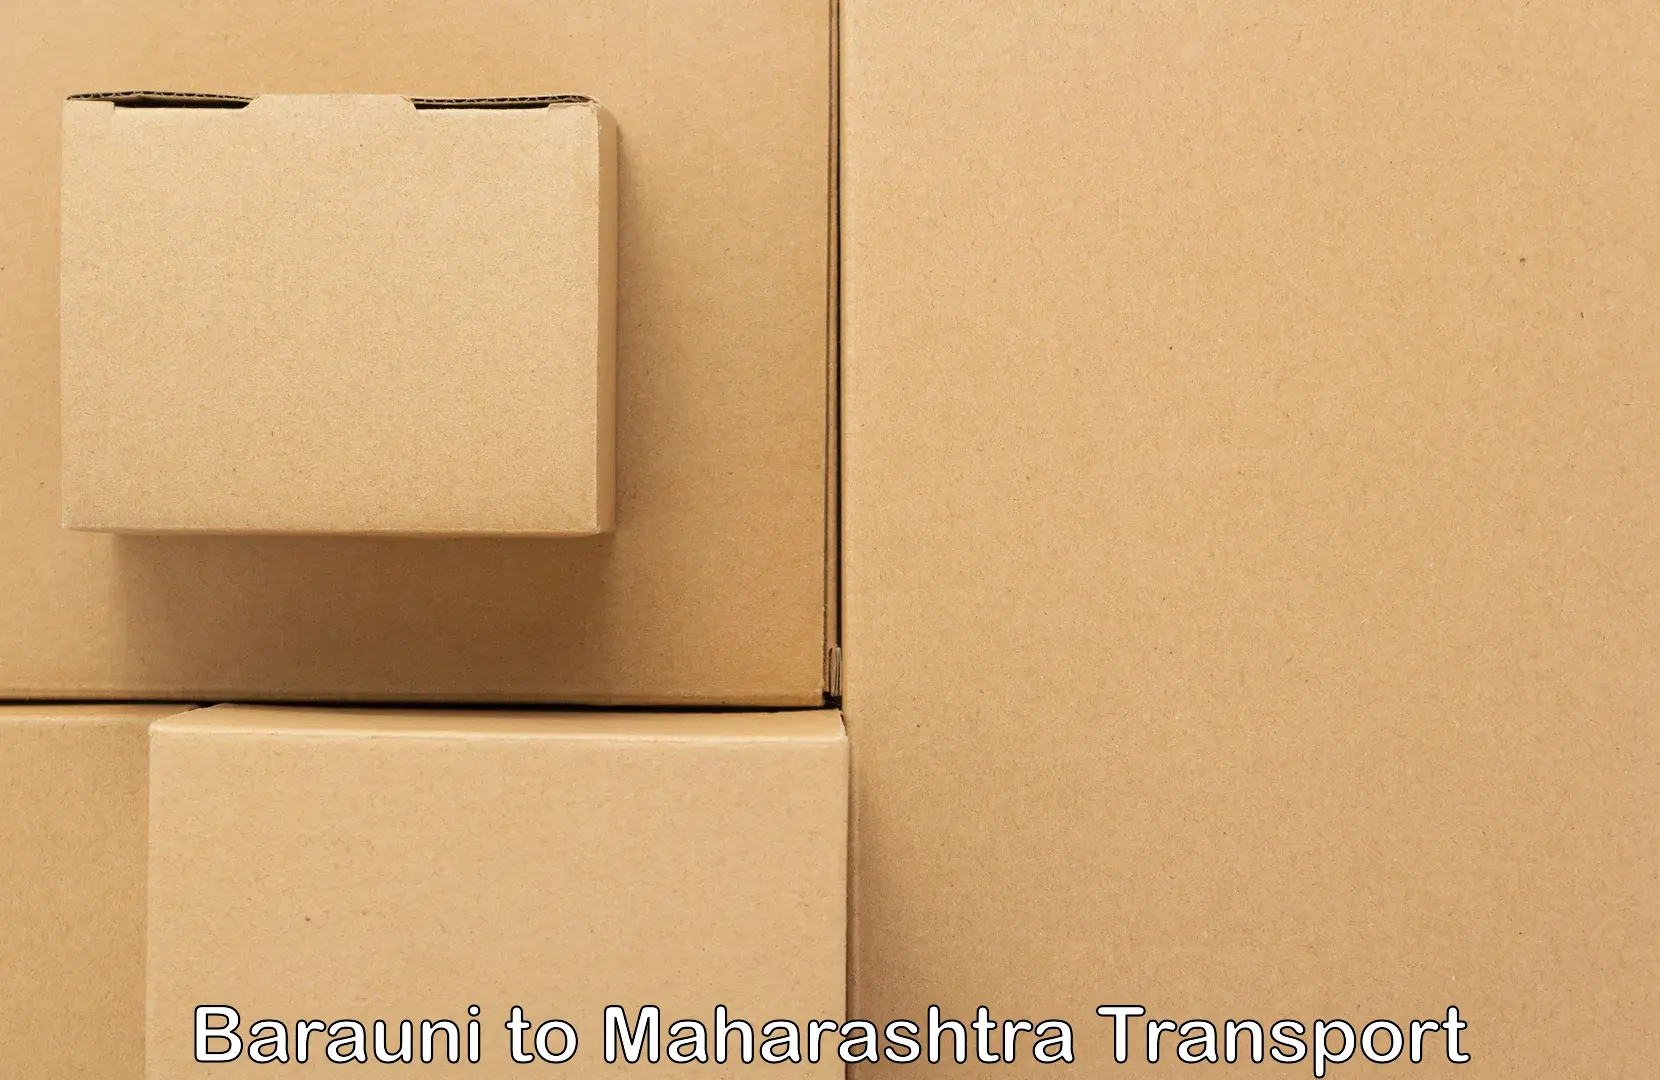 Truck transport companies in India Barauni to Panchwad